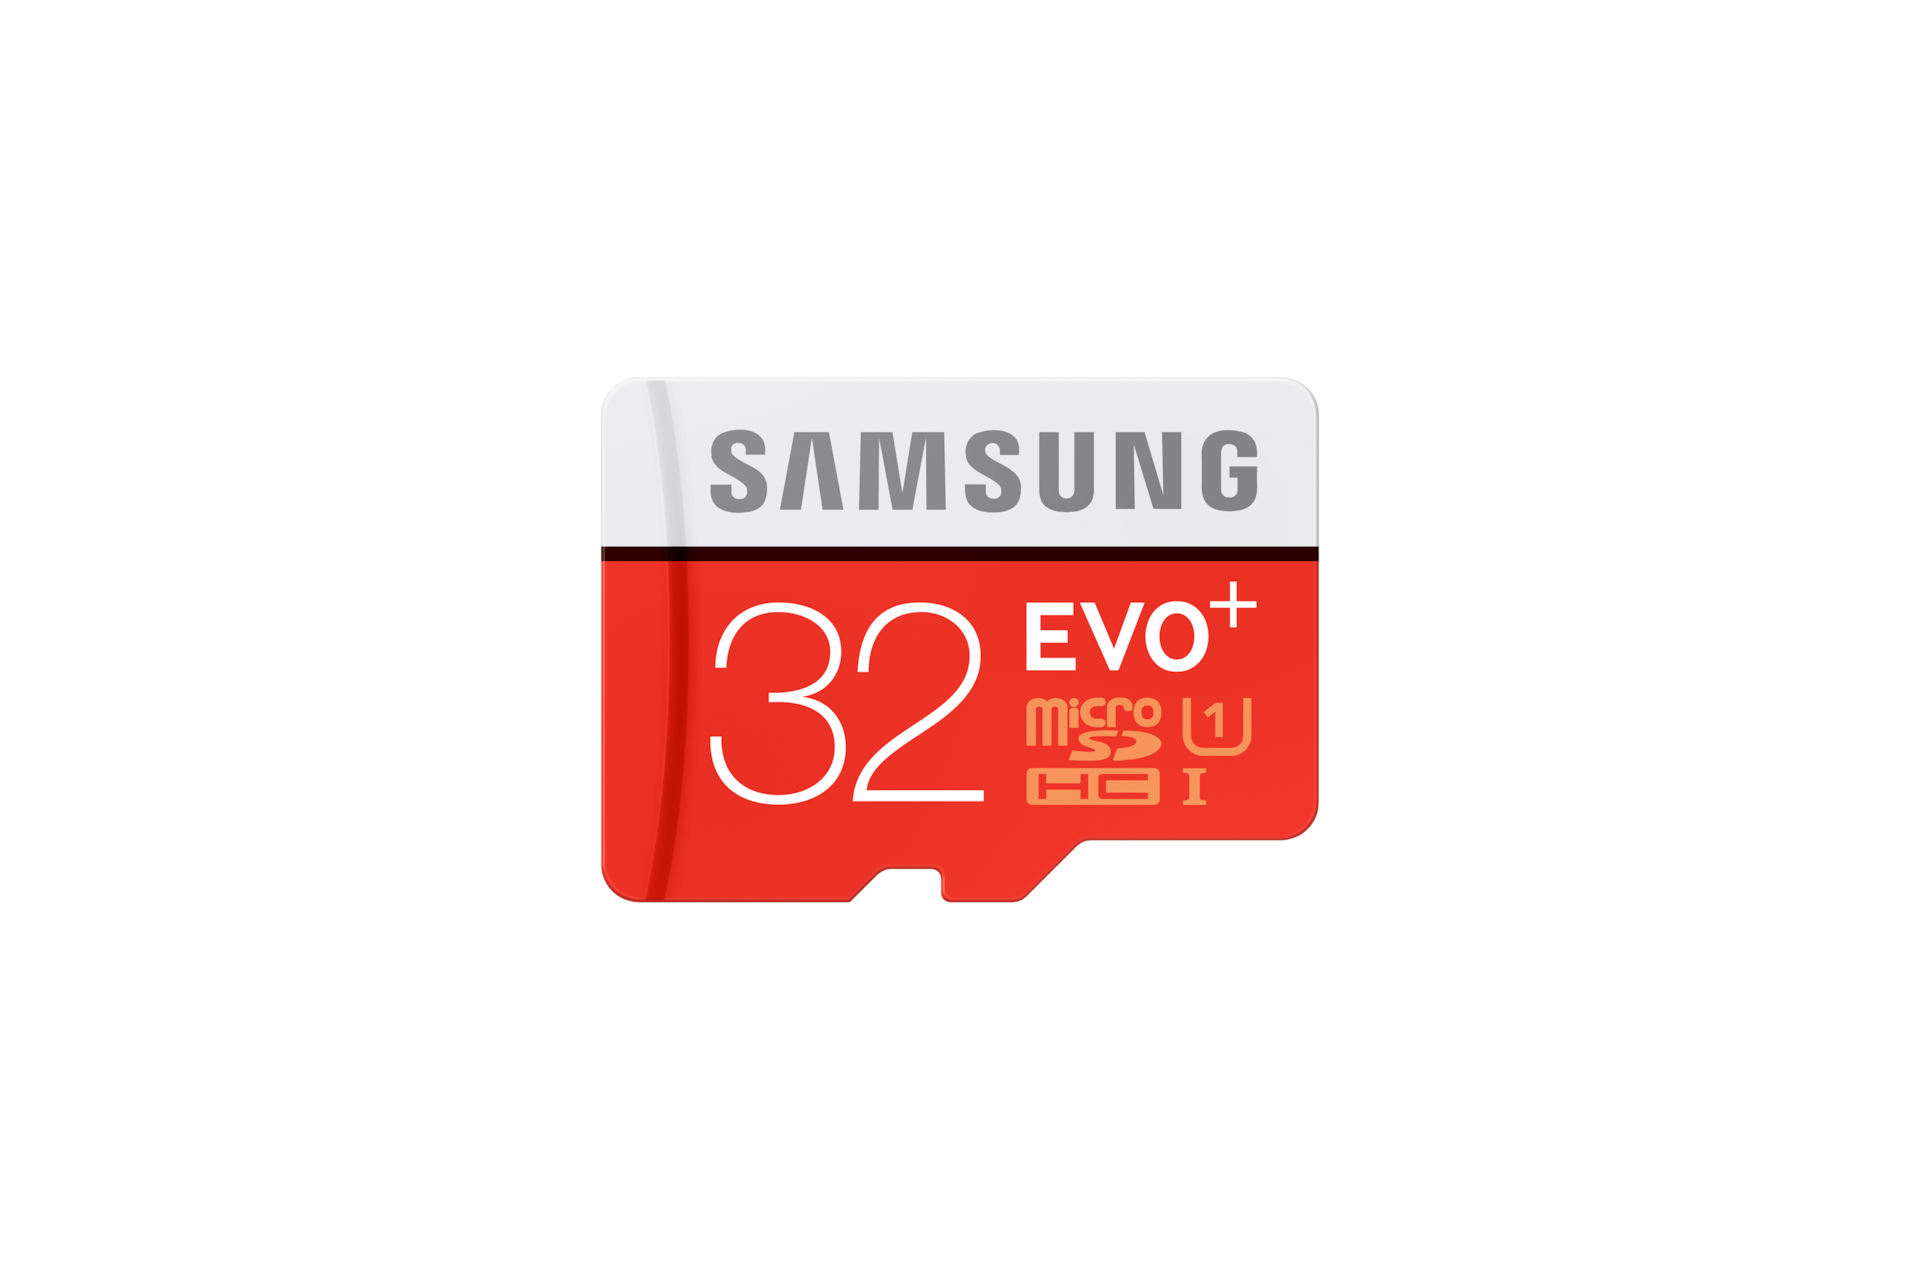 https://images.samsung.com/is/image/samsung/es-evo-plus-microsd-card-mb-mc32d-eu-001-front-red?$650_519_PNG$